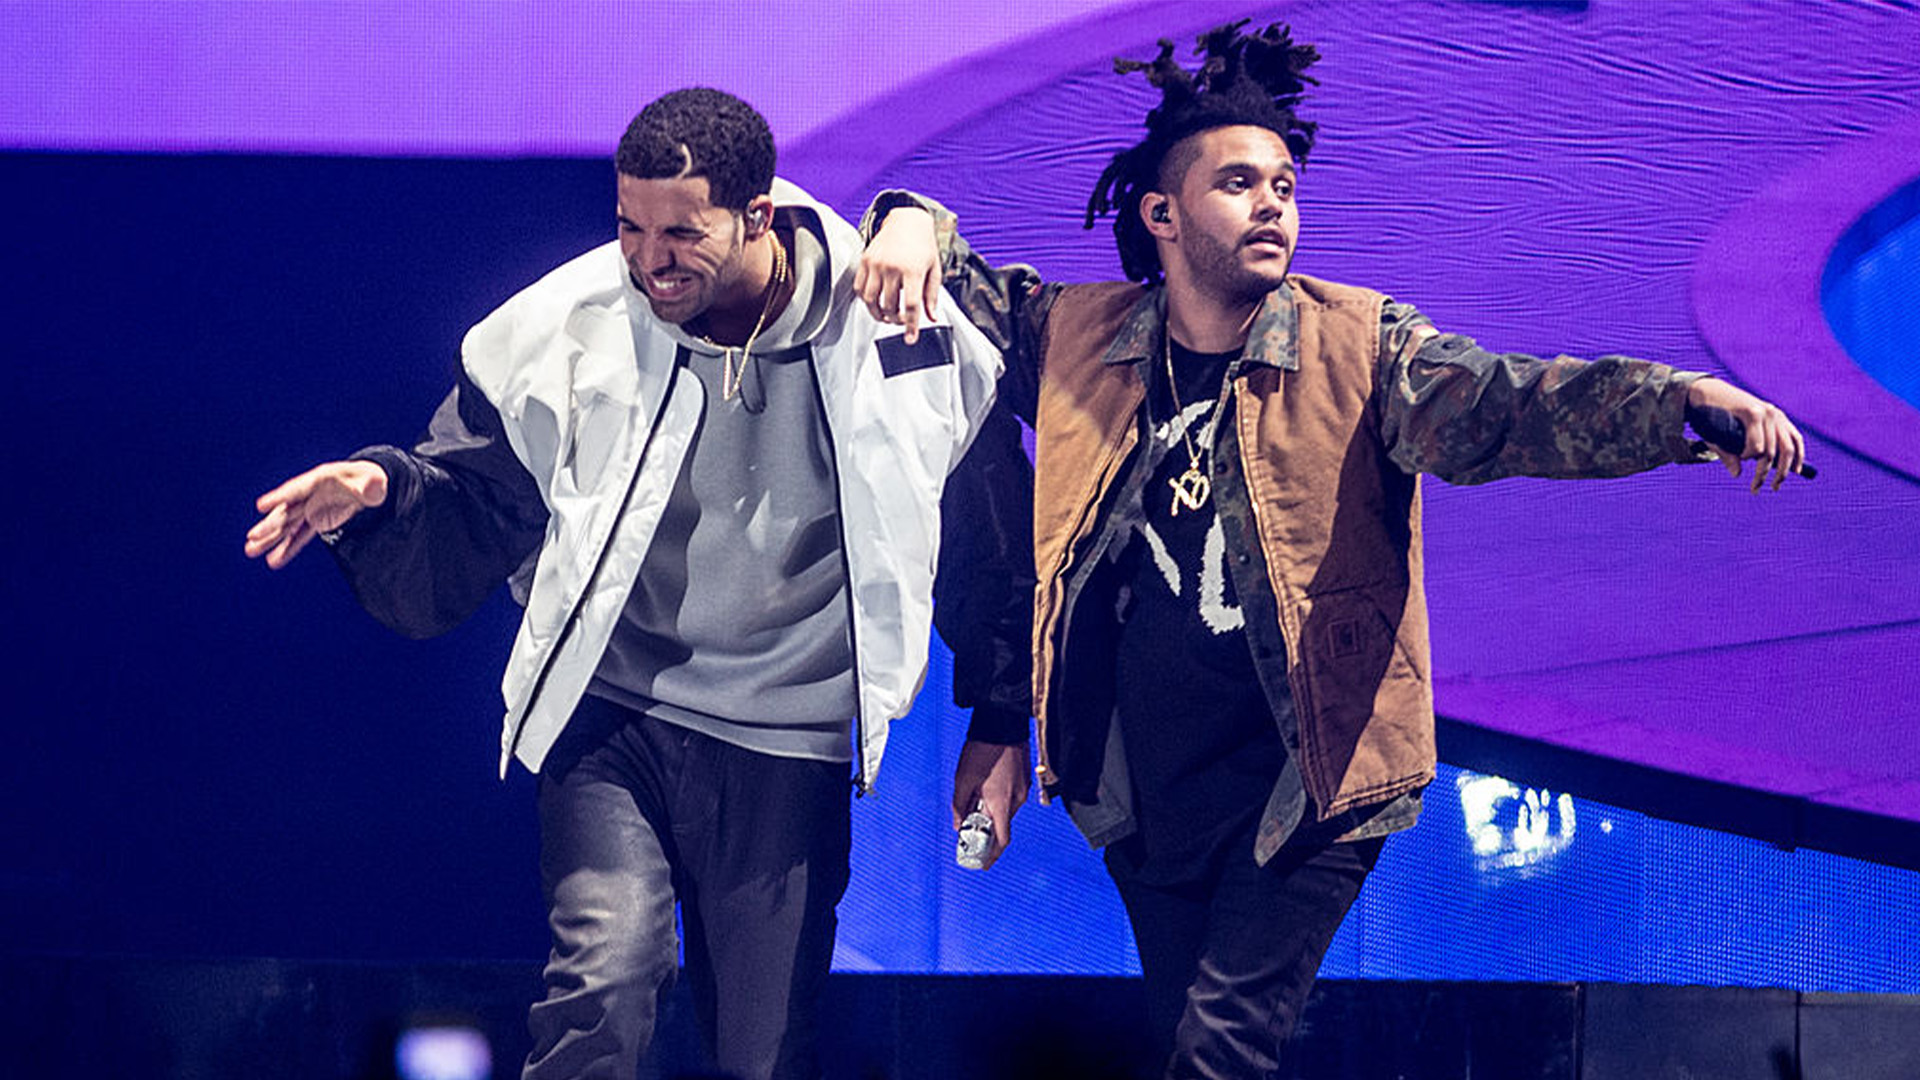 UMG Has Viral AI Song With Drake And The Weeknd Snatched From Streaming Services